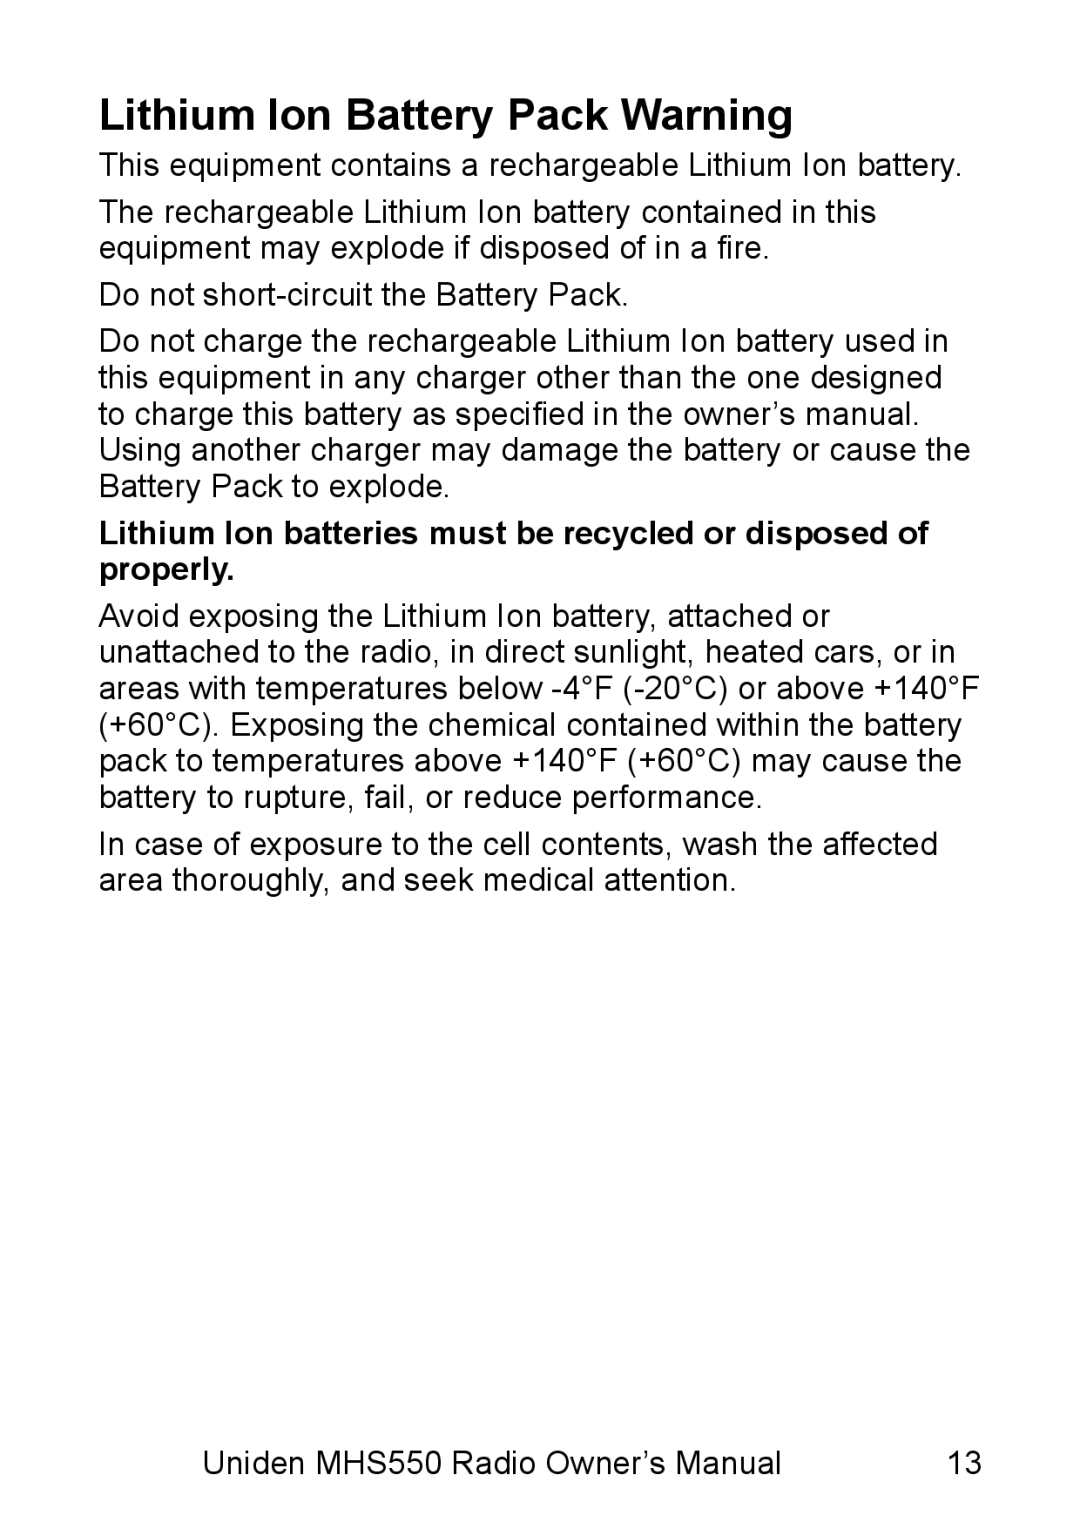 Uniden MHS550 manual Lithium Ion Battery Pack Warning 